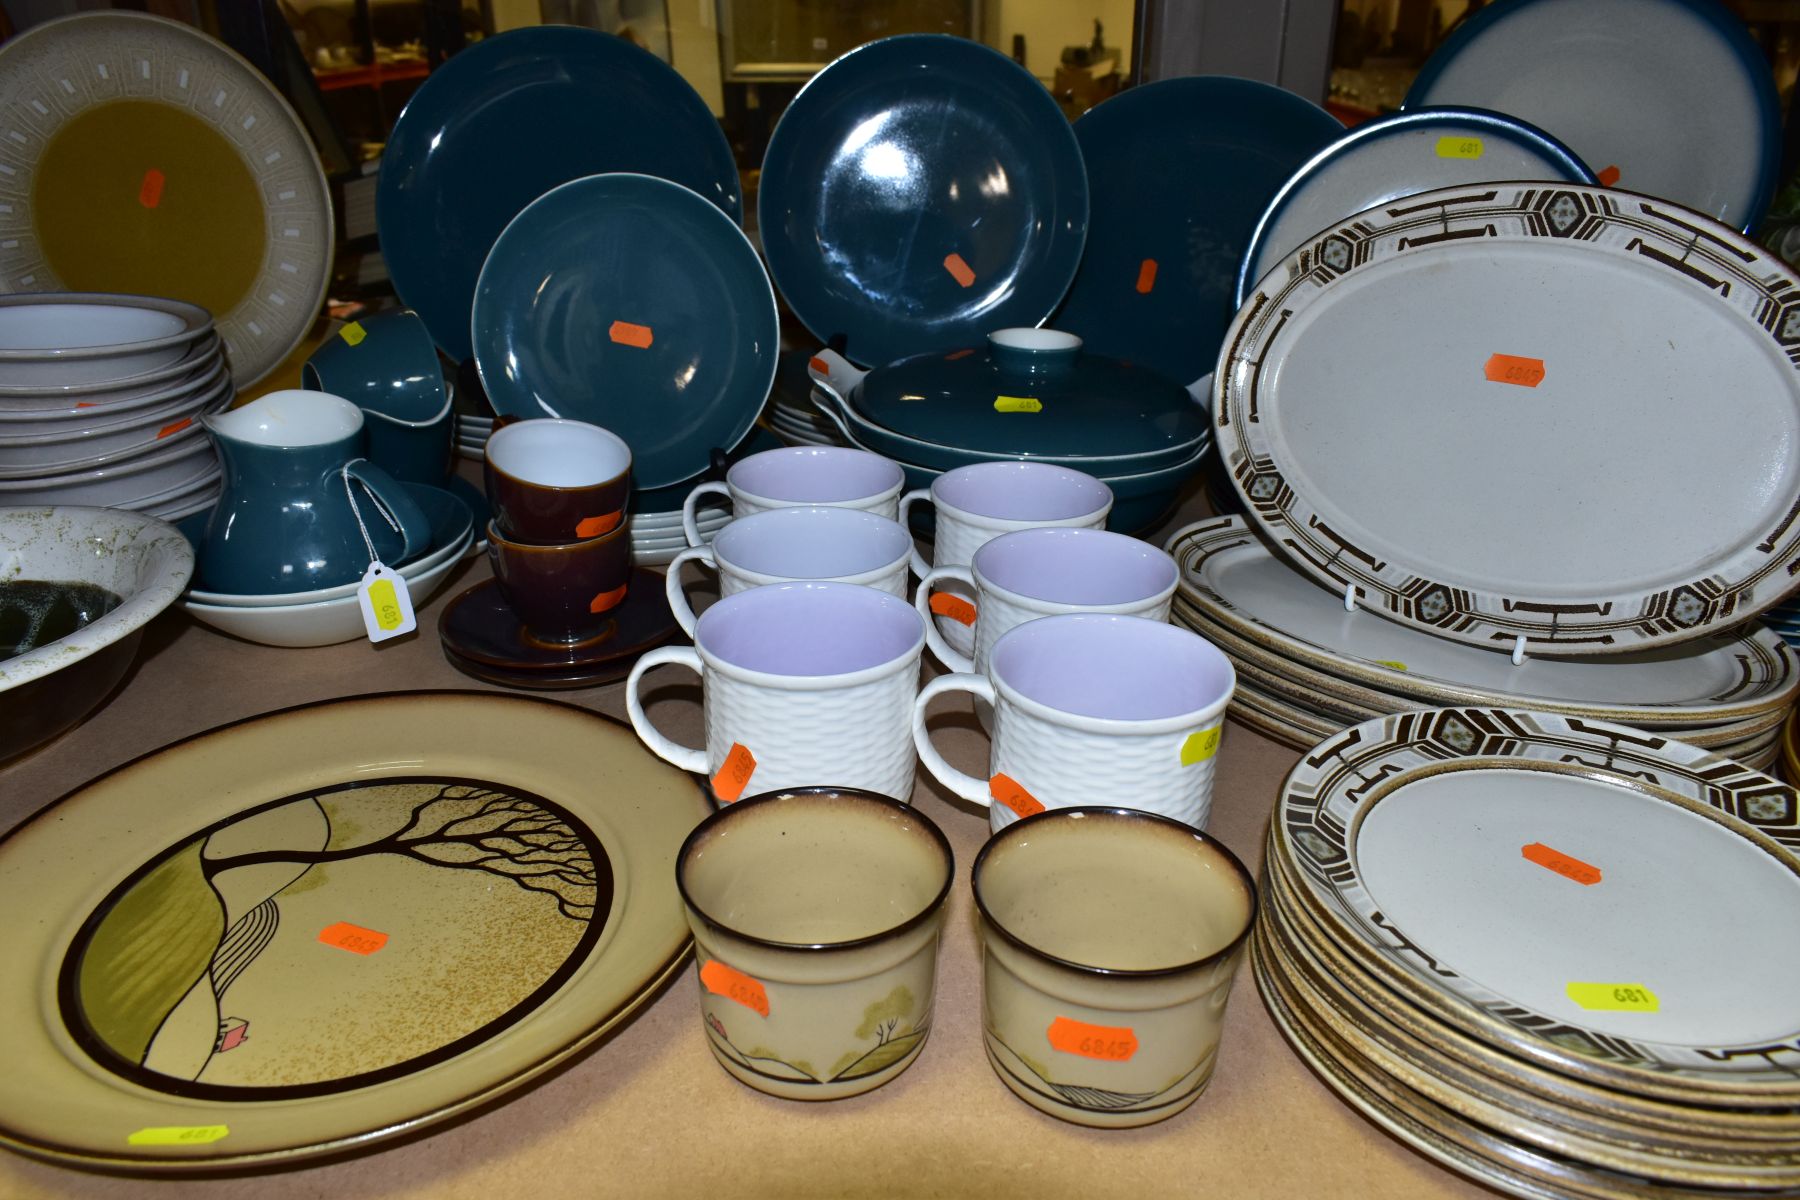 A QUANTITY OF ASSORTED POOLE, DENBY TEA AND DINNERWARES AND OTHER SIMILAR POTTERY STONEWARE ITEMS,